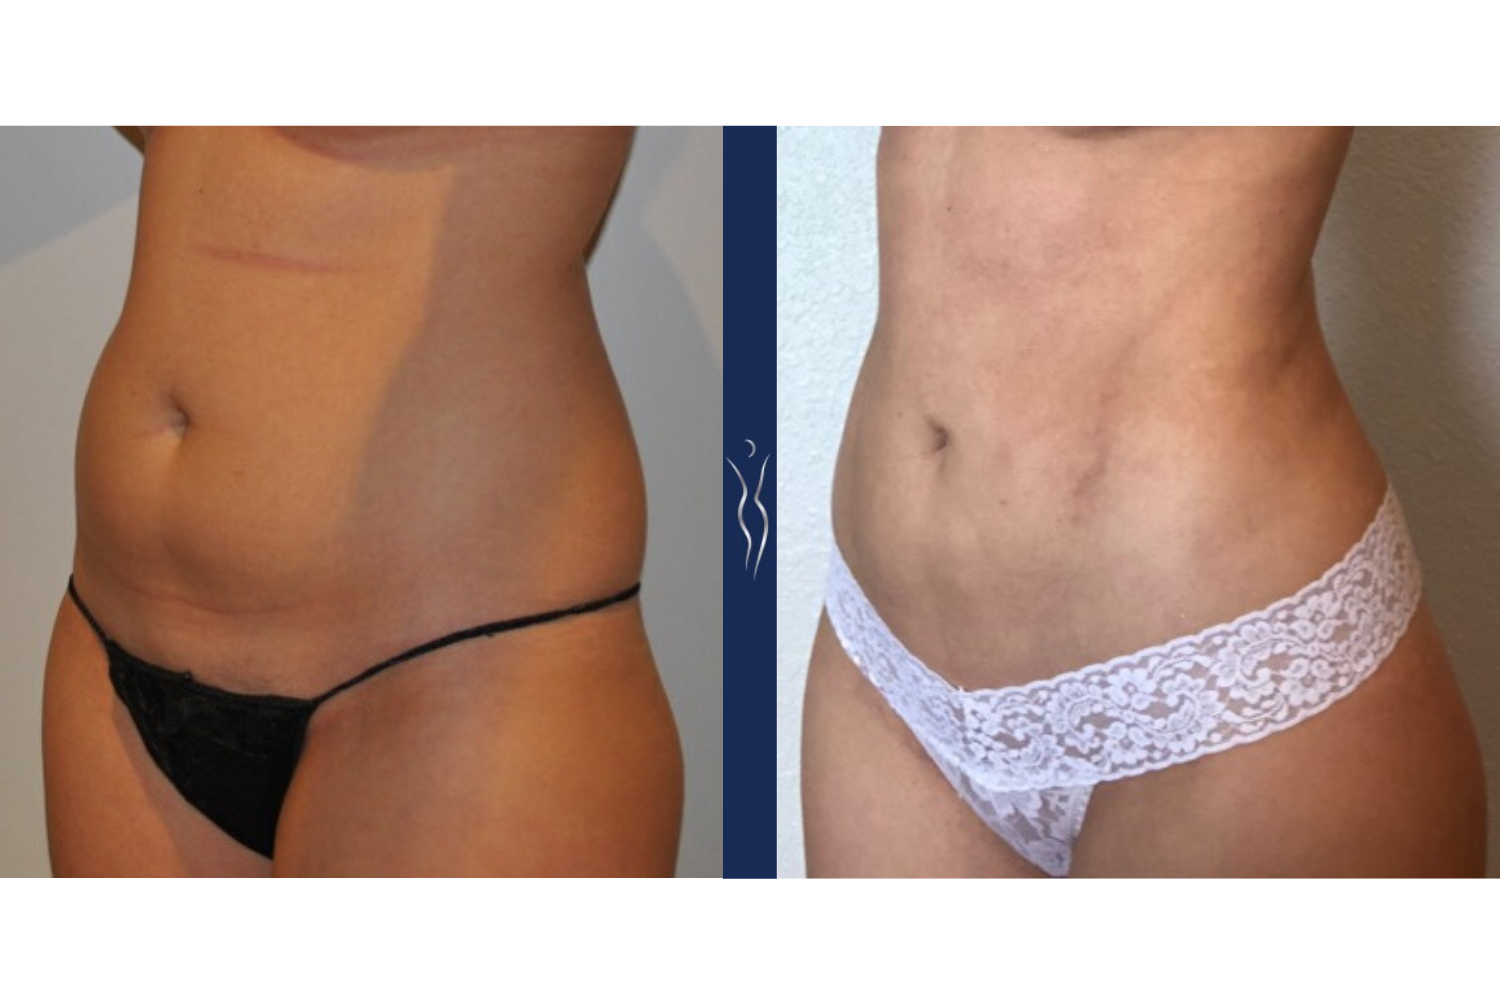 29 year old caucasian lady VASER liposuction and Renuvion with Brazilian Butt Lift left oblique